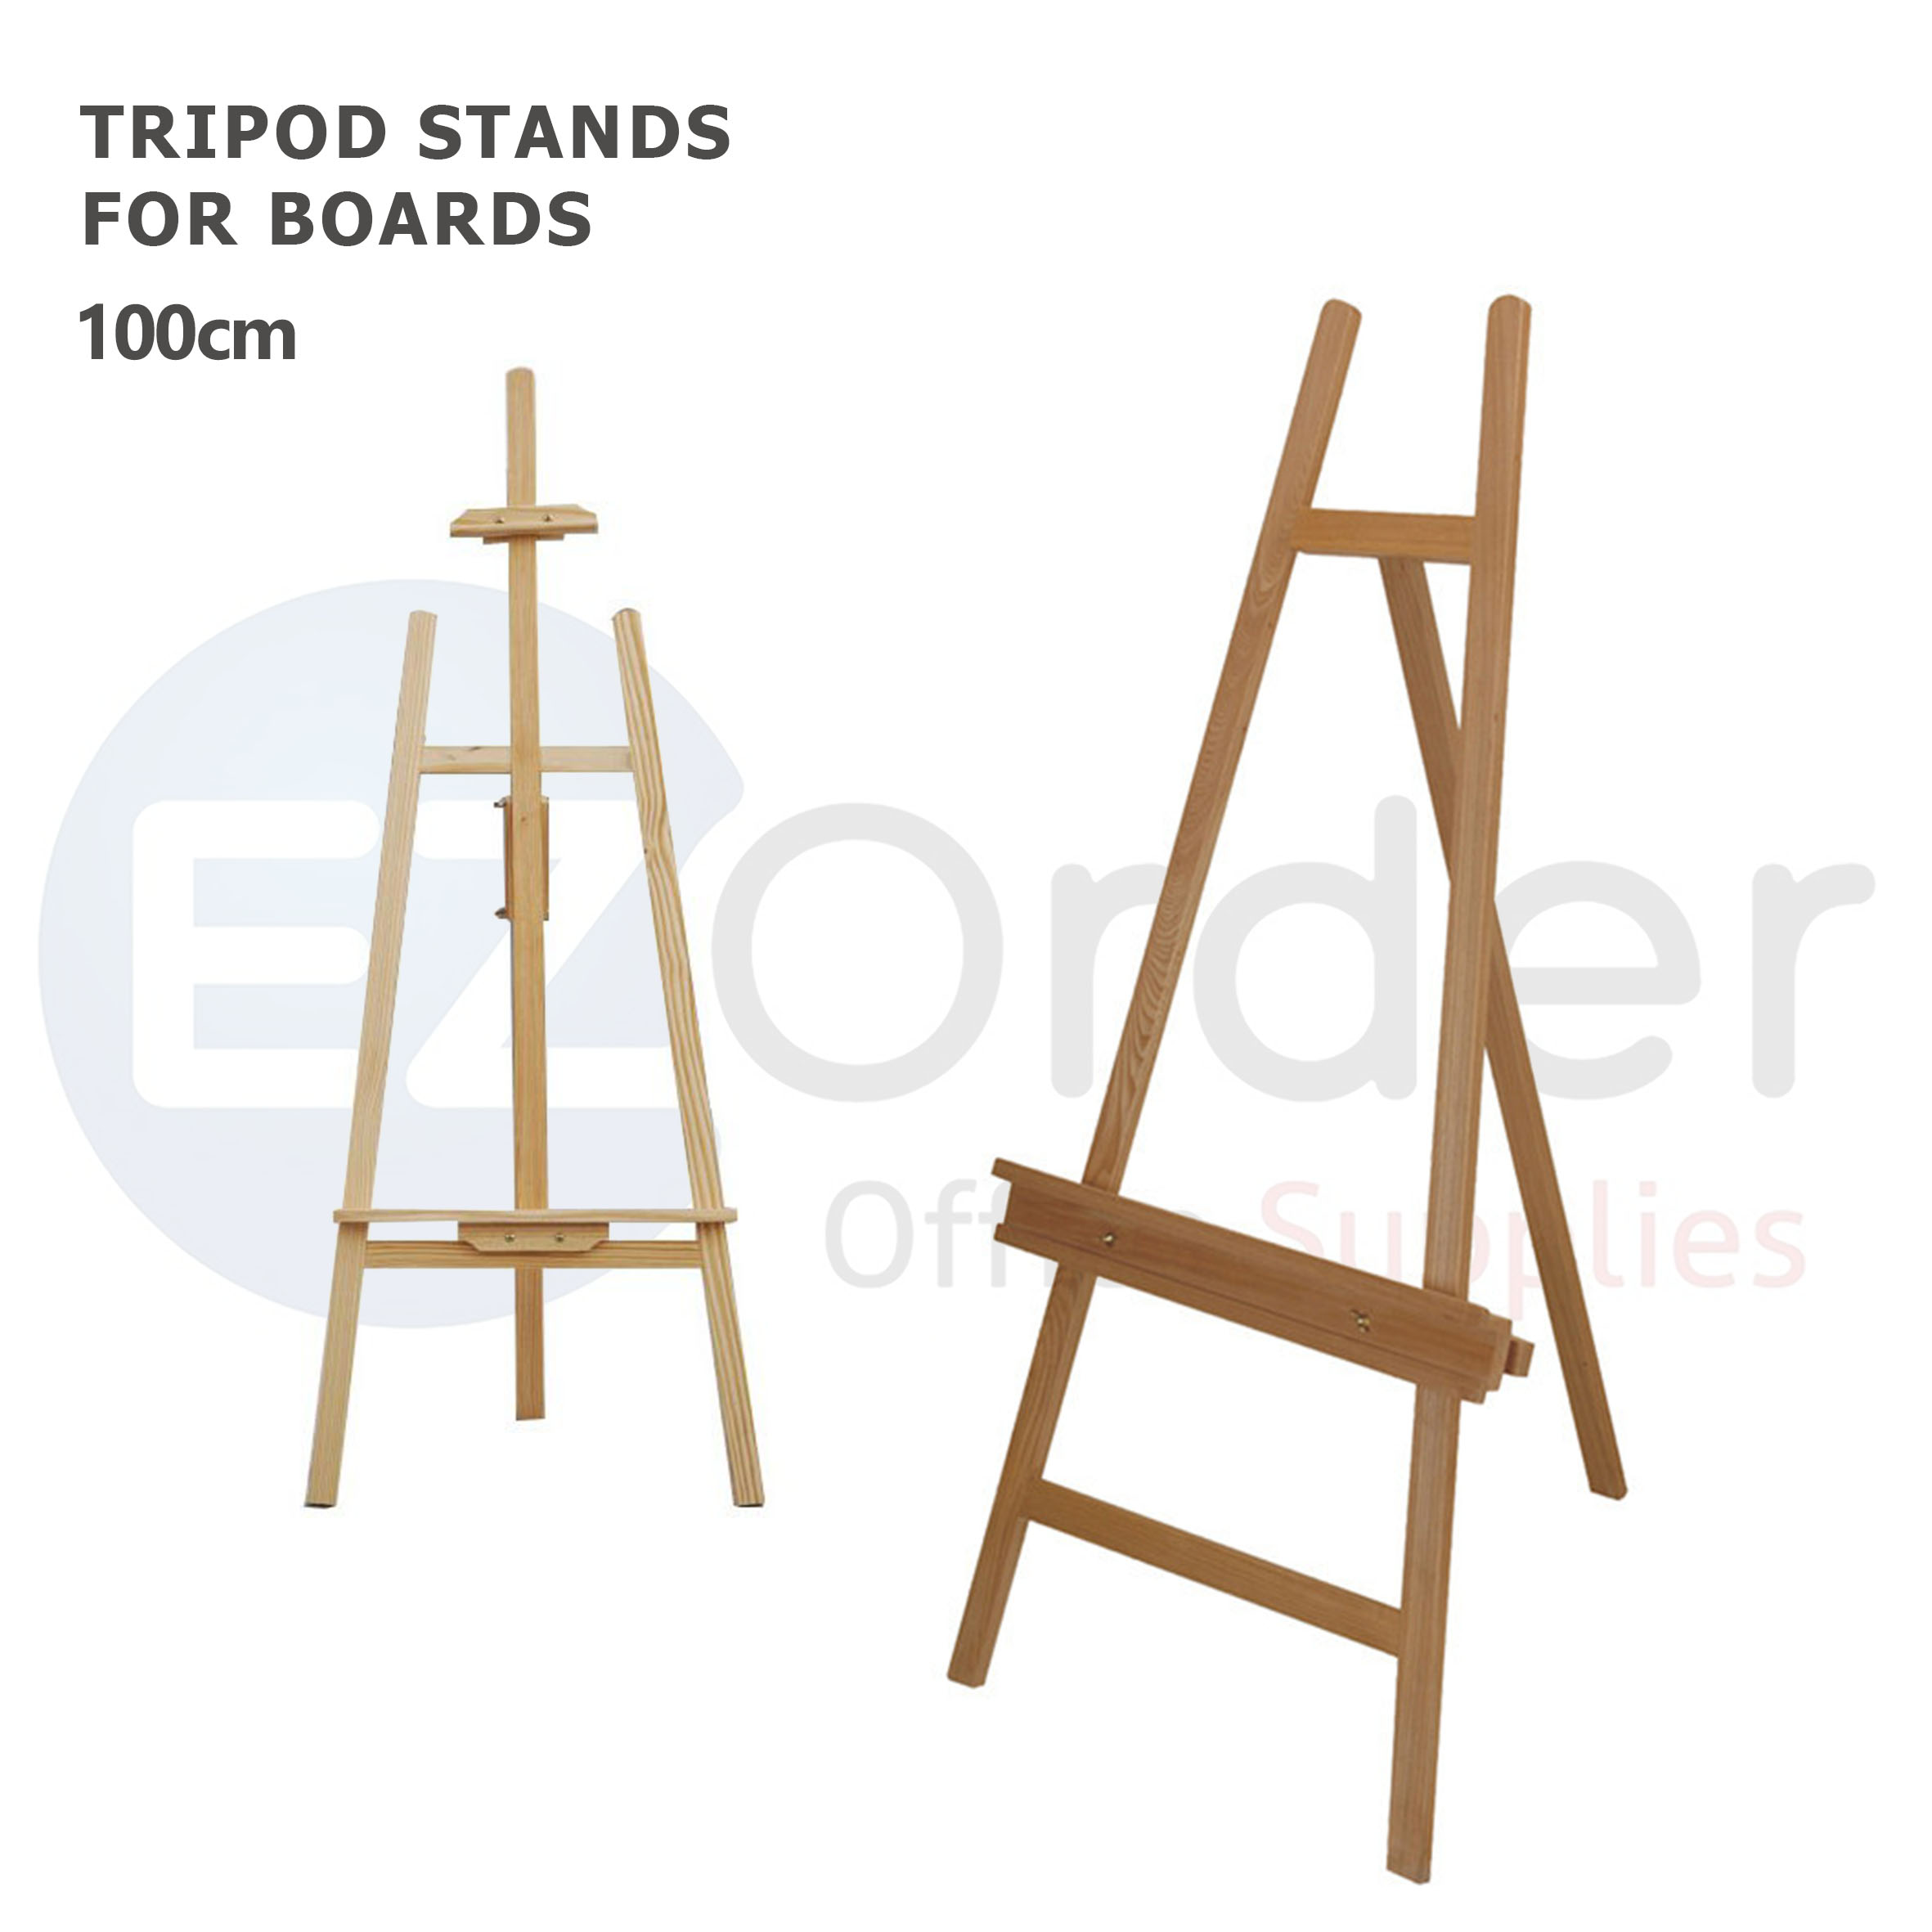 WOODEN tripod stand for Boards, adjustable shelf